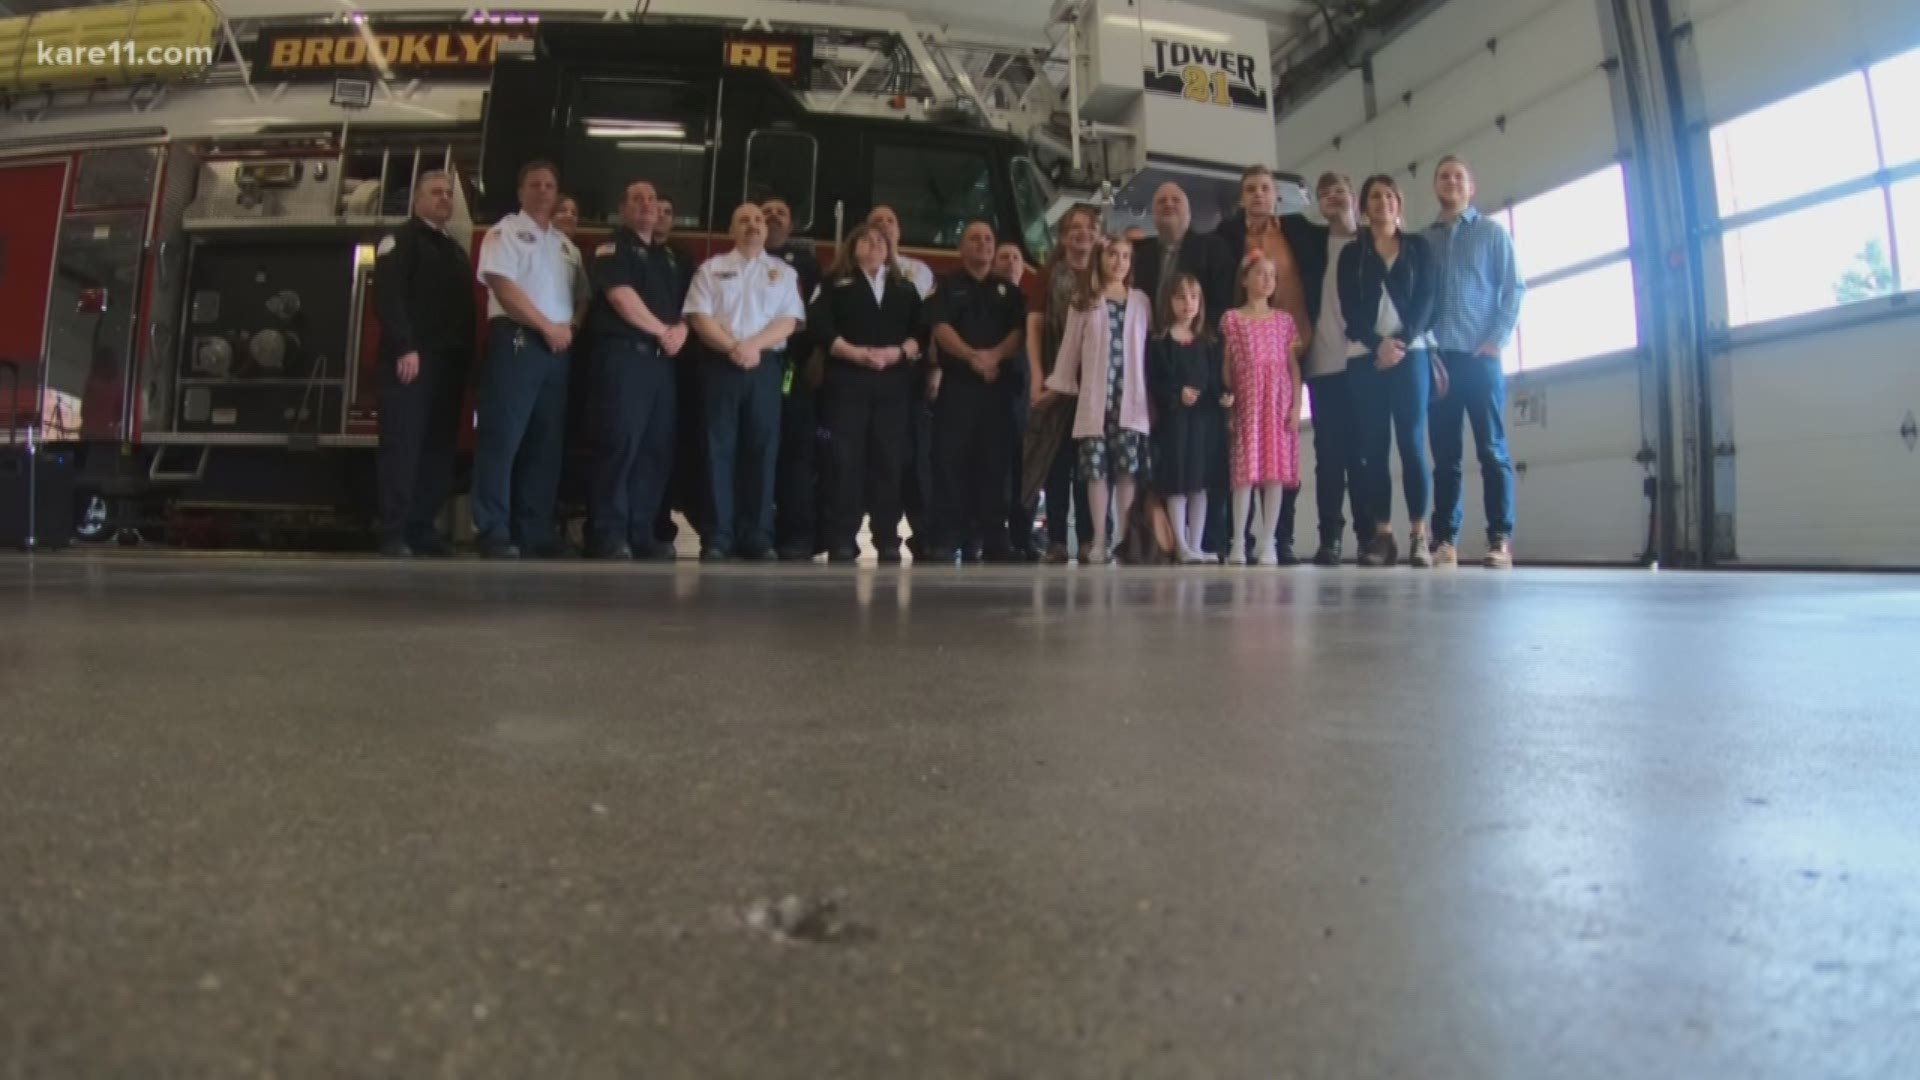 Rich Peil had not one, but two heart attacks. Both times, his wife started CPR. Both times, first responders showed up and made sure she didn't lose him for good. Monday, they got to say thanks. https://kare11.tv/2vt7eCU